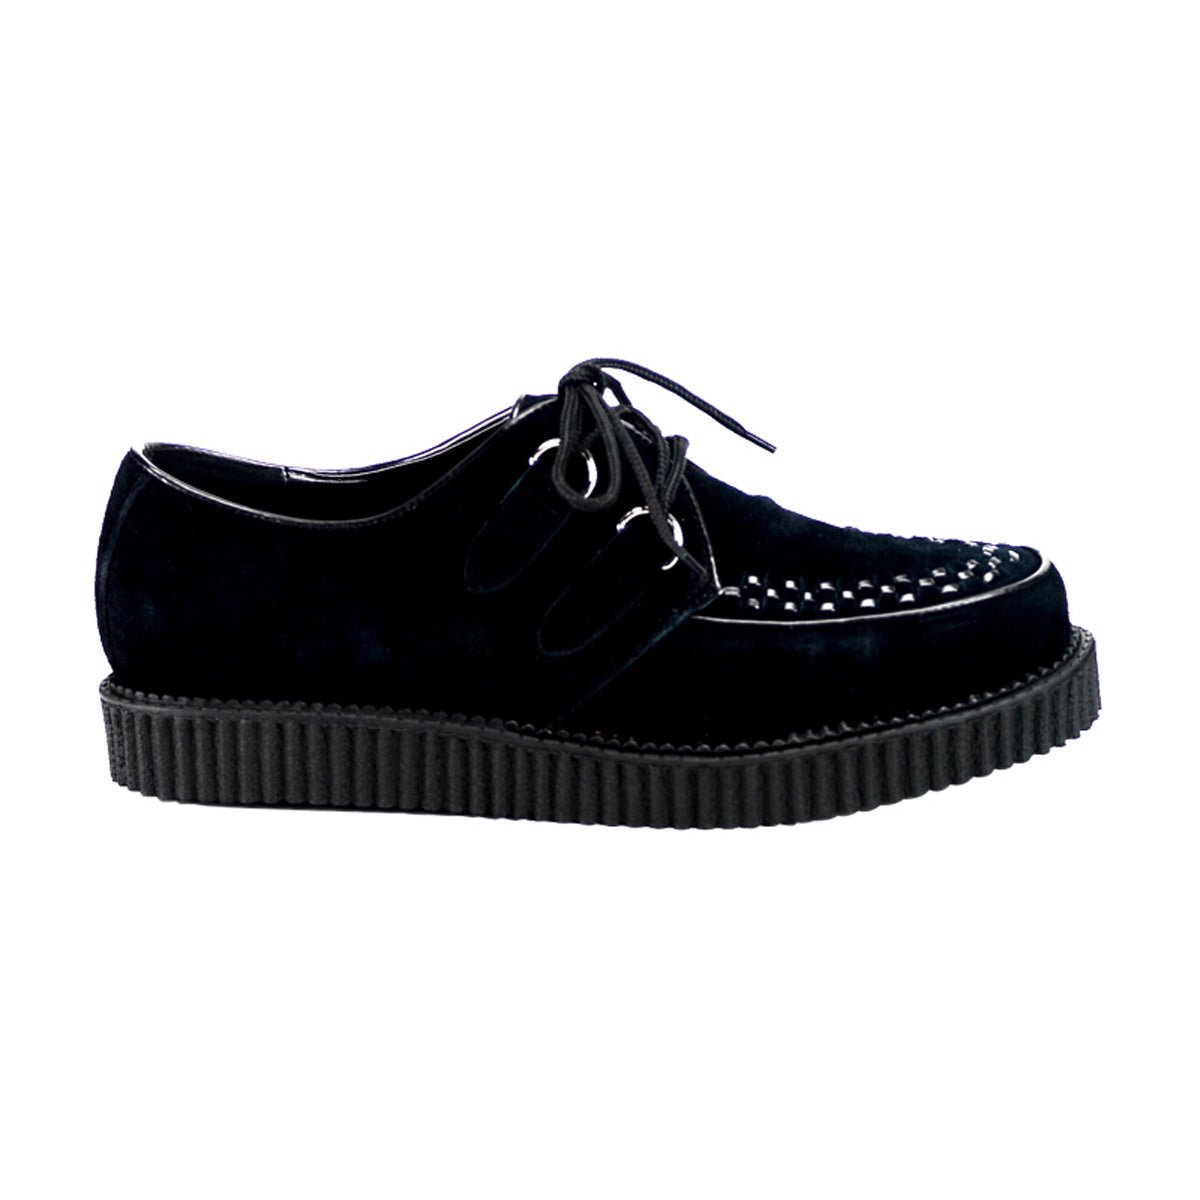 Clearance DemoniaCult Creeper 602S Black Suede Mens/Unisex Size 8UK/9USA